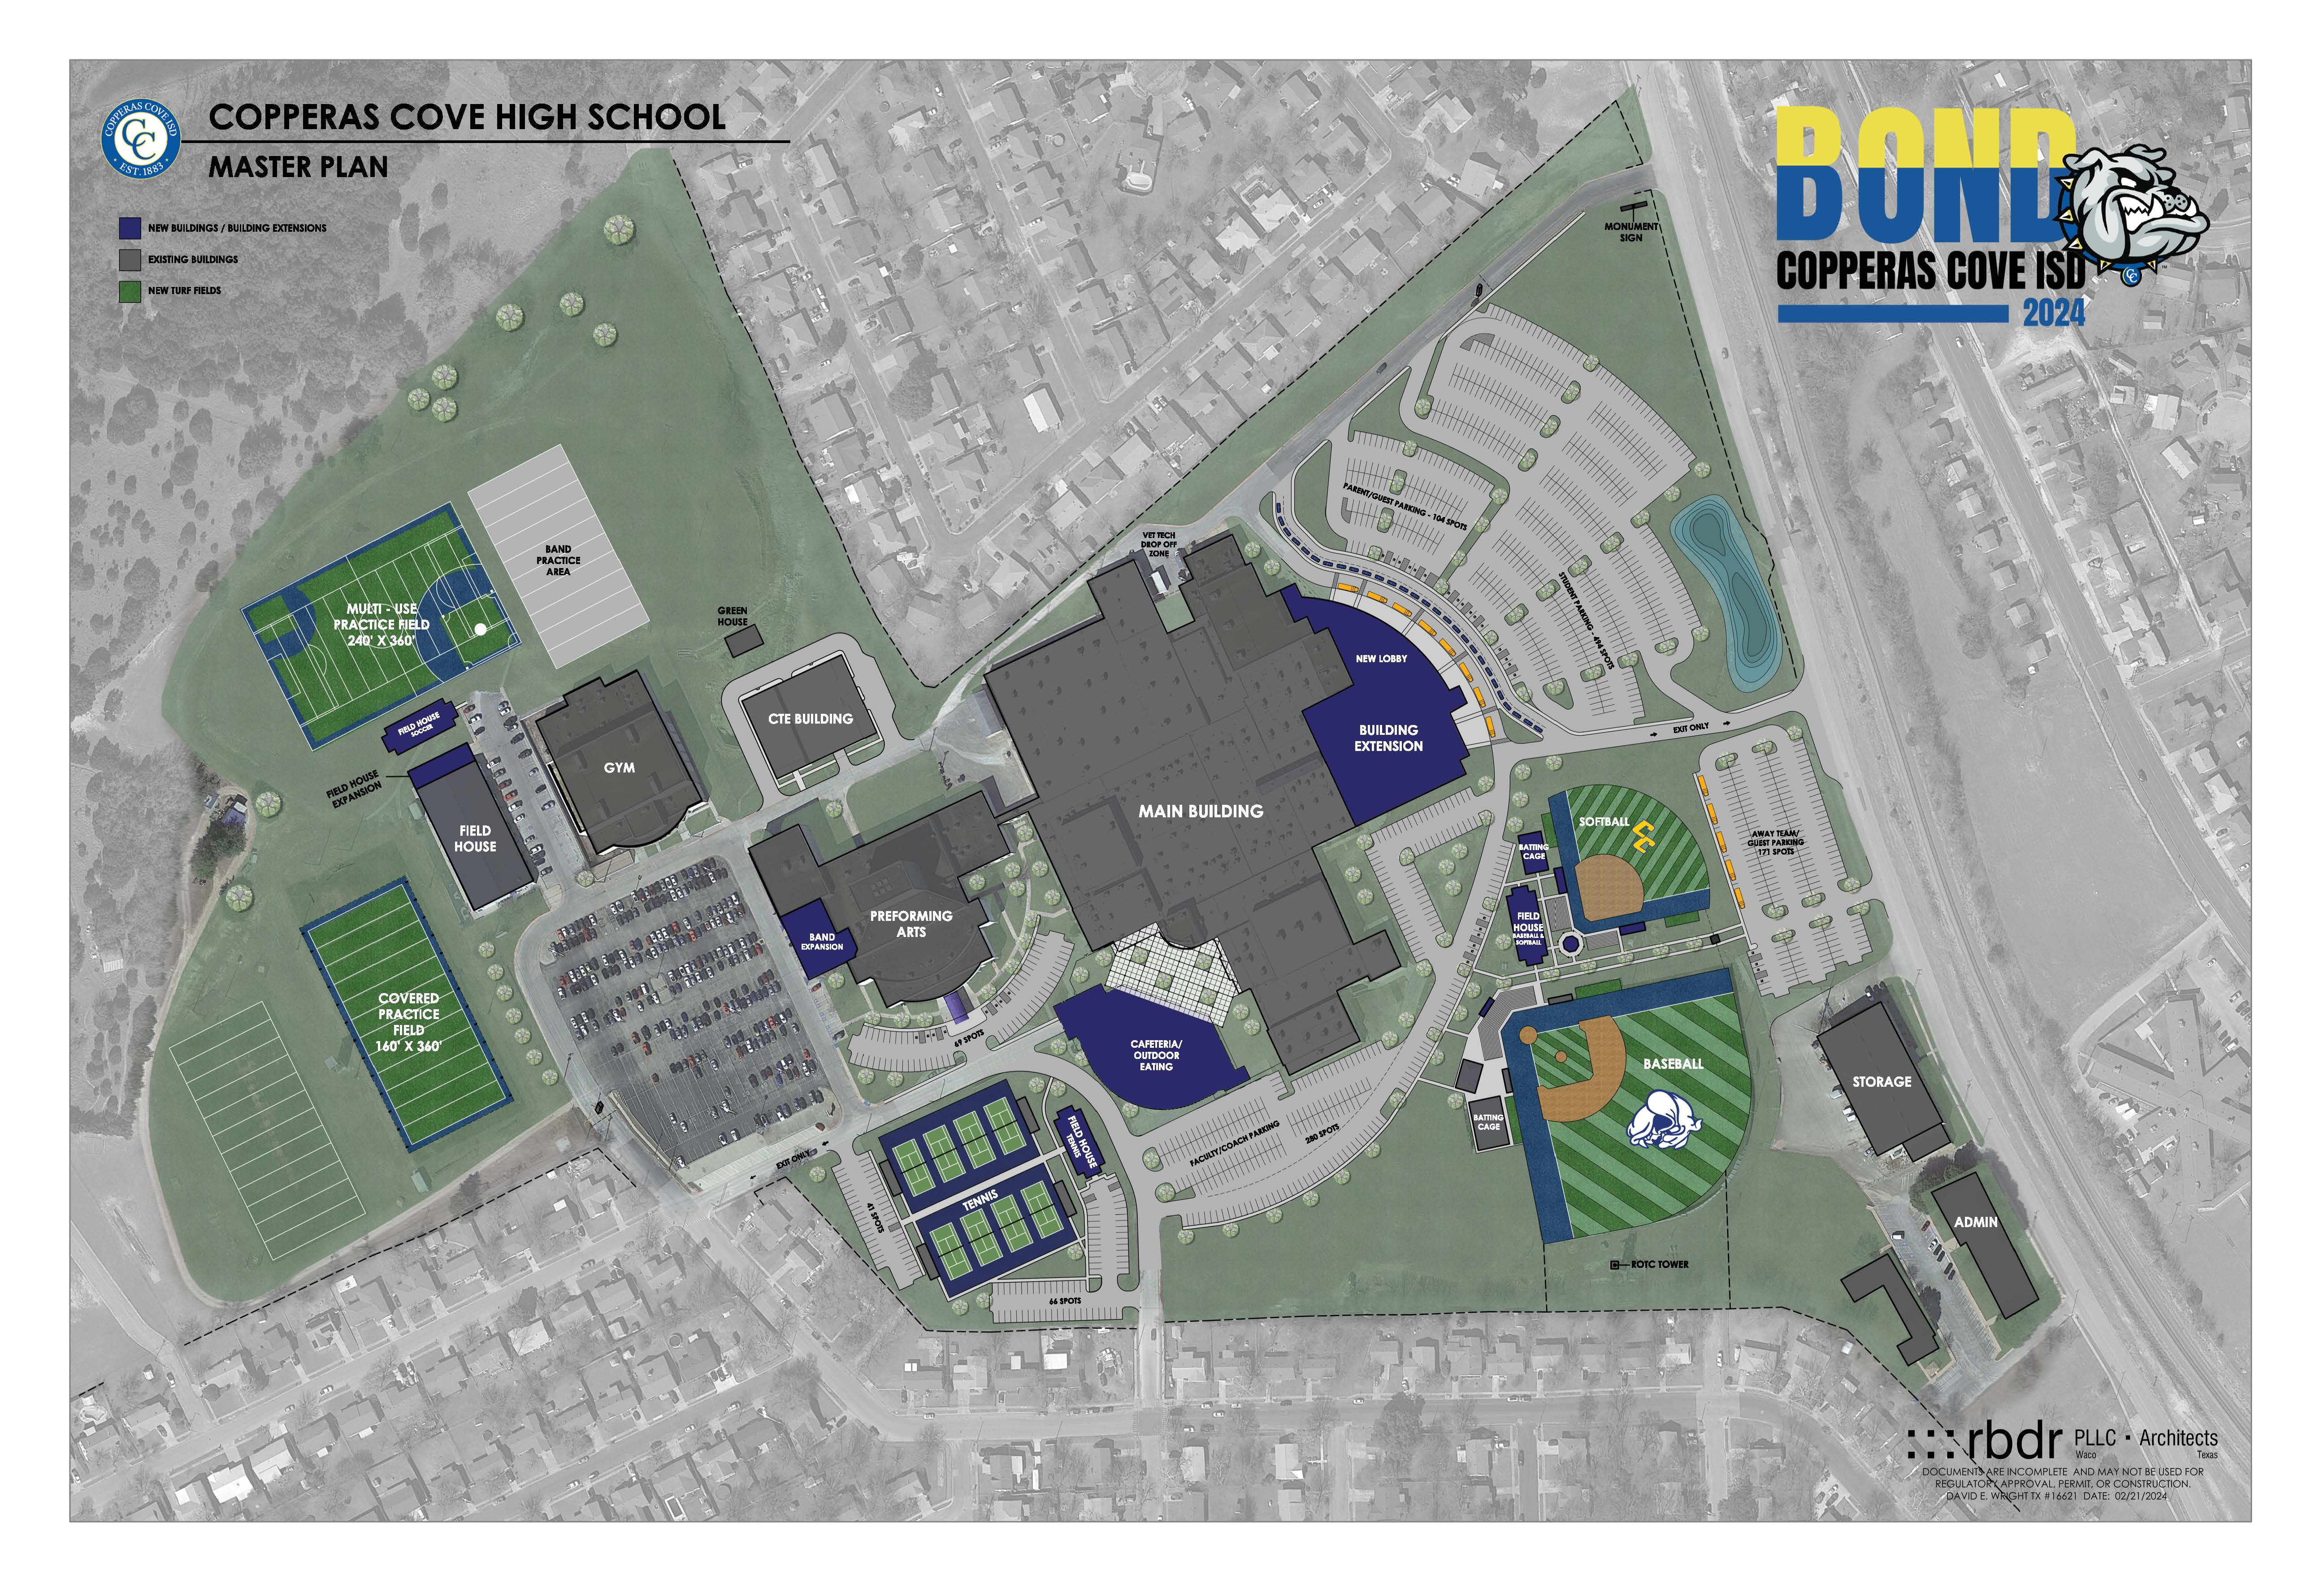 Proposed site map of a renovated Copperas Cove High School. 